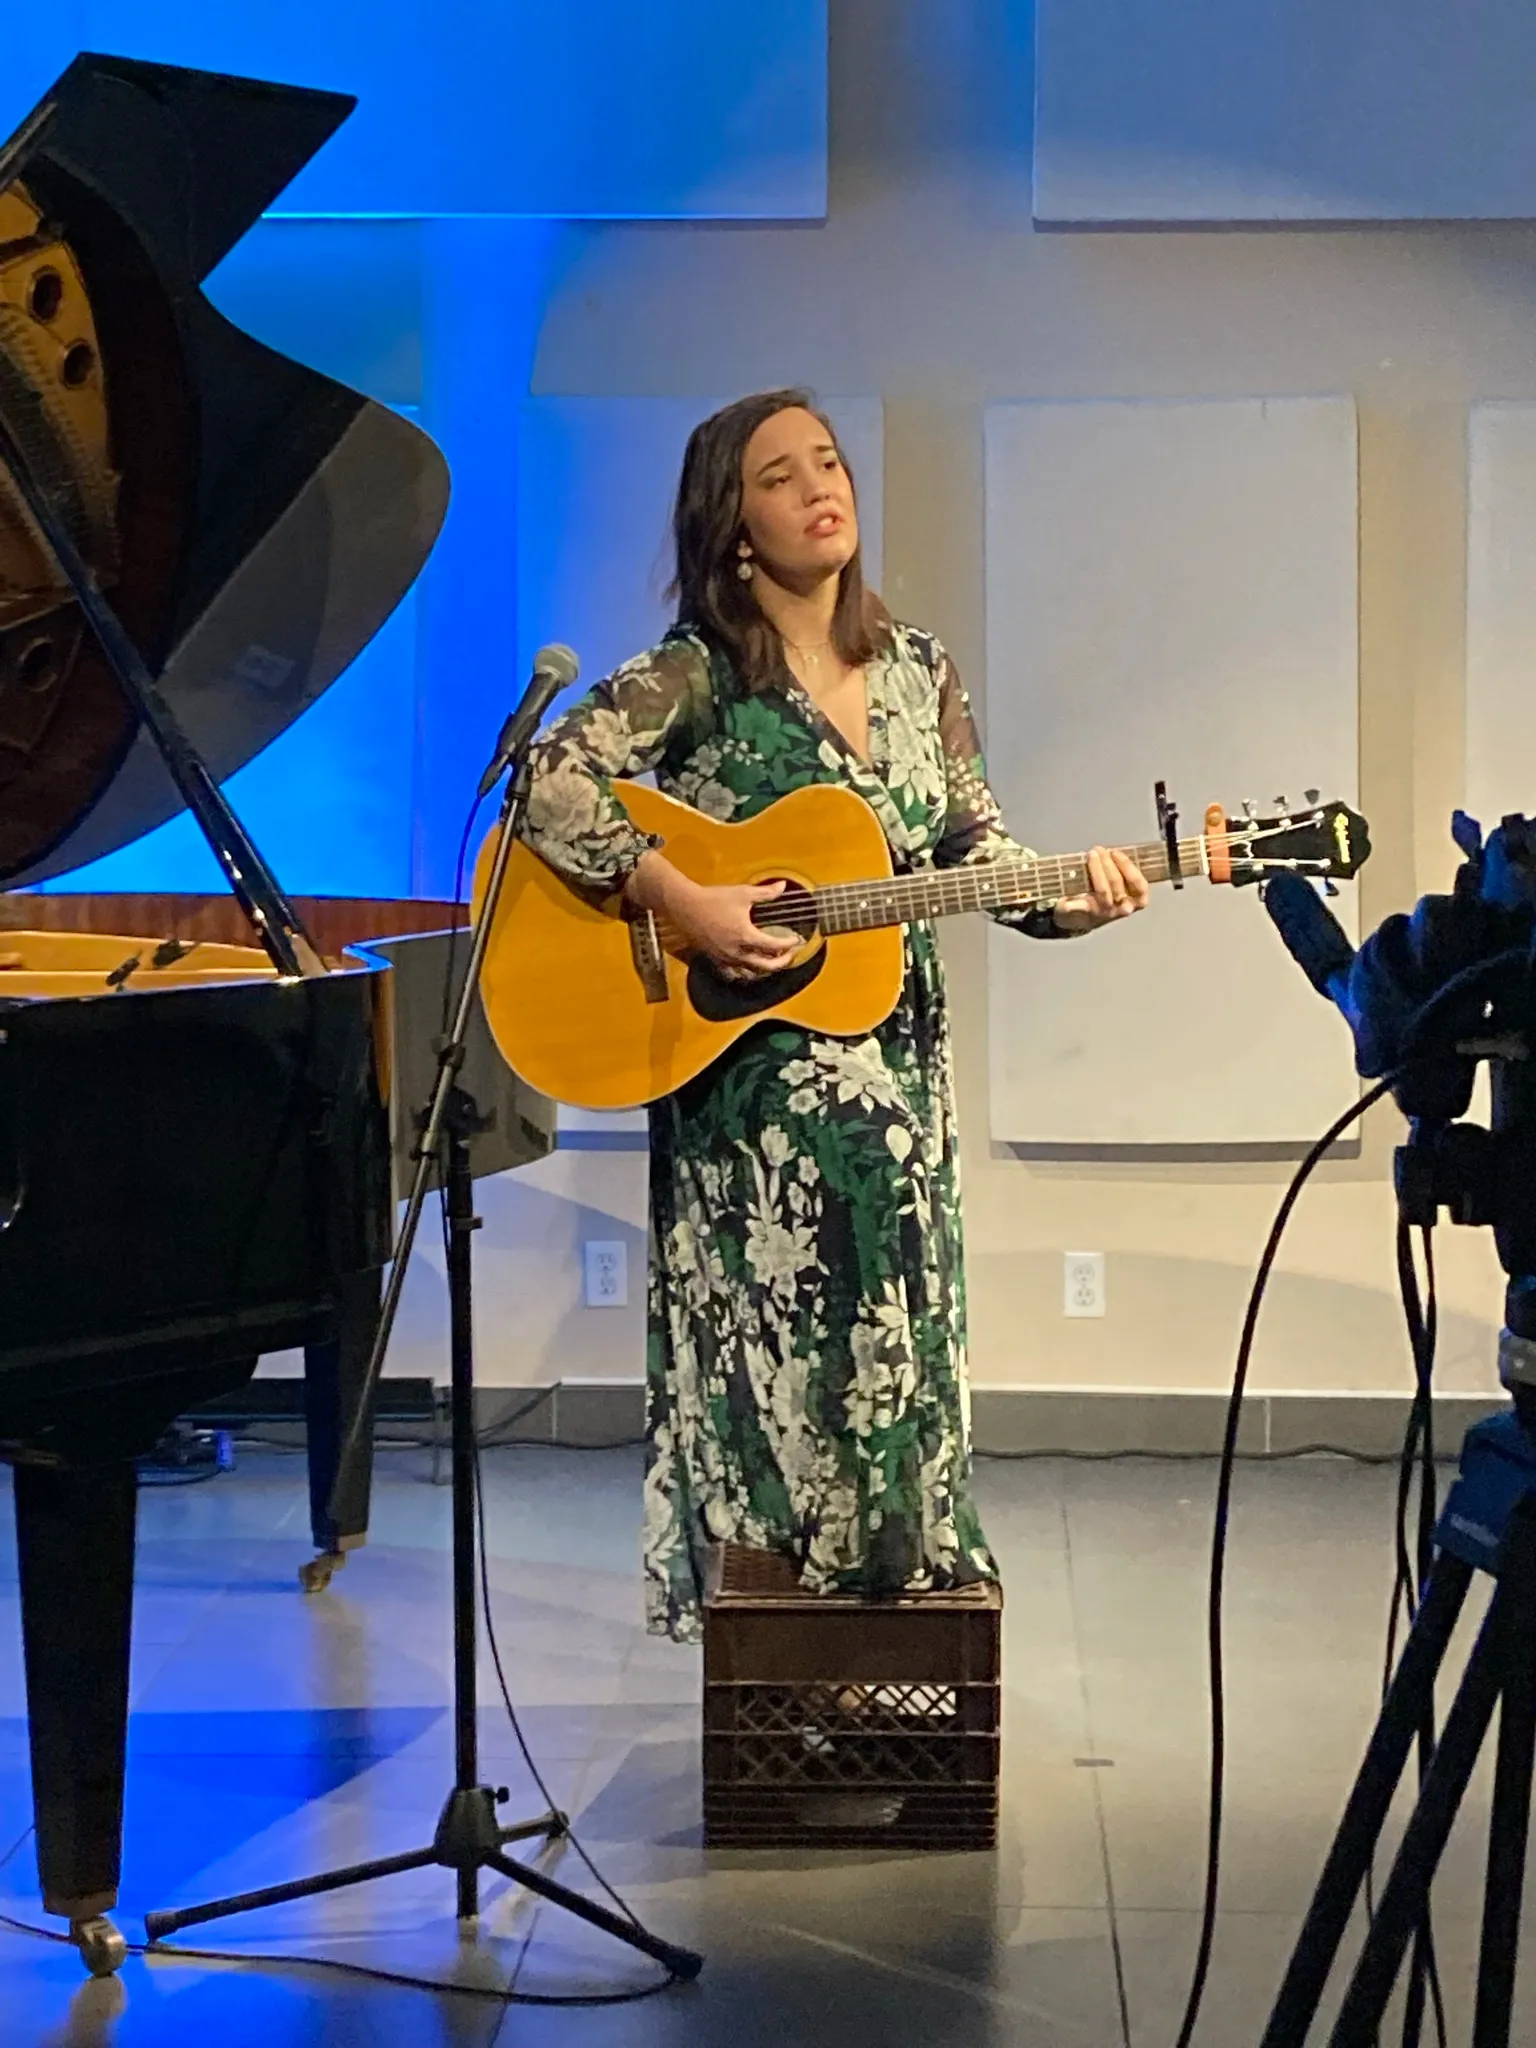 Catherine performed live on WDNA 88.9 FM during the FIU Music Hour, representing alumni of the FIU Vocal Performance program. She sang her original song Dear Moon with guitar.